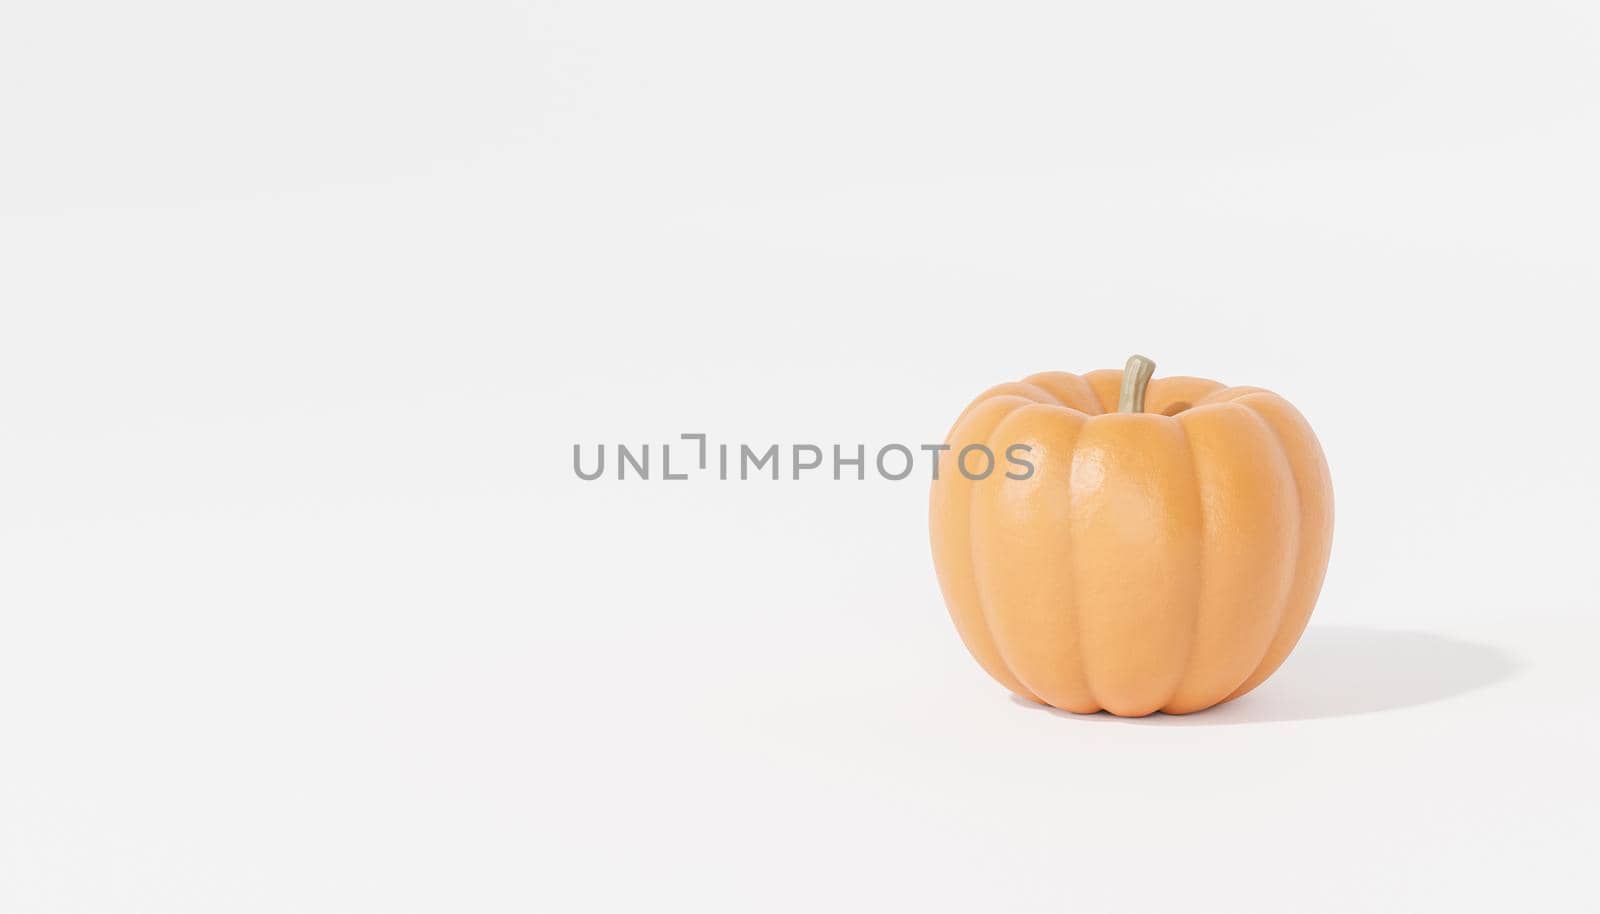 Pumpkin on white background for advertising on autumn holidays or sales, 3d banner render